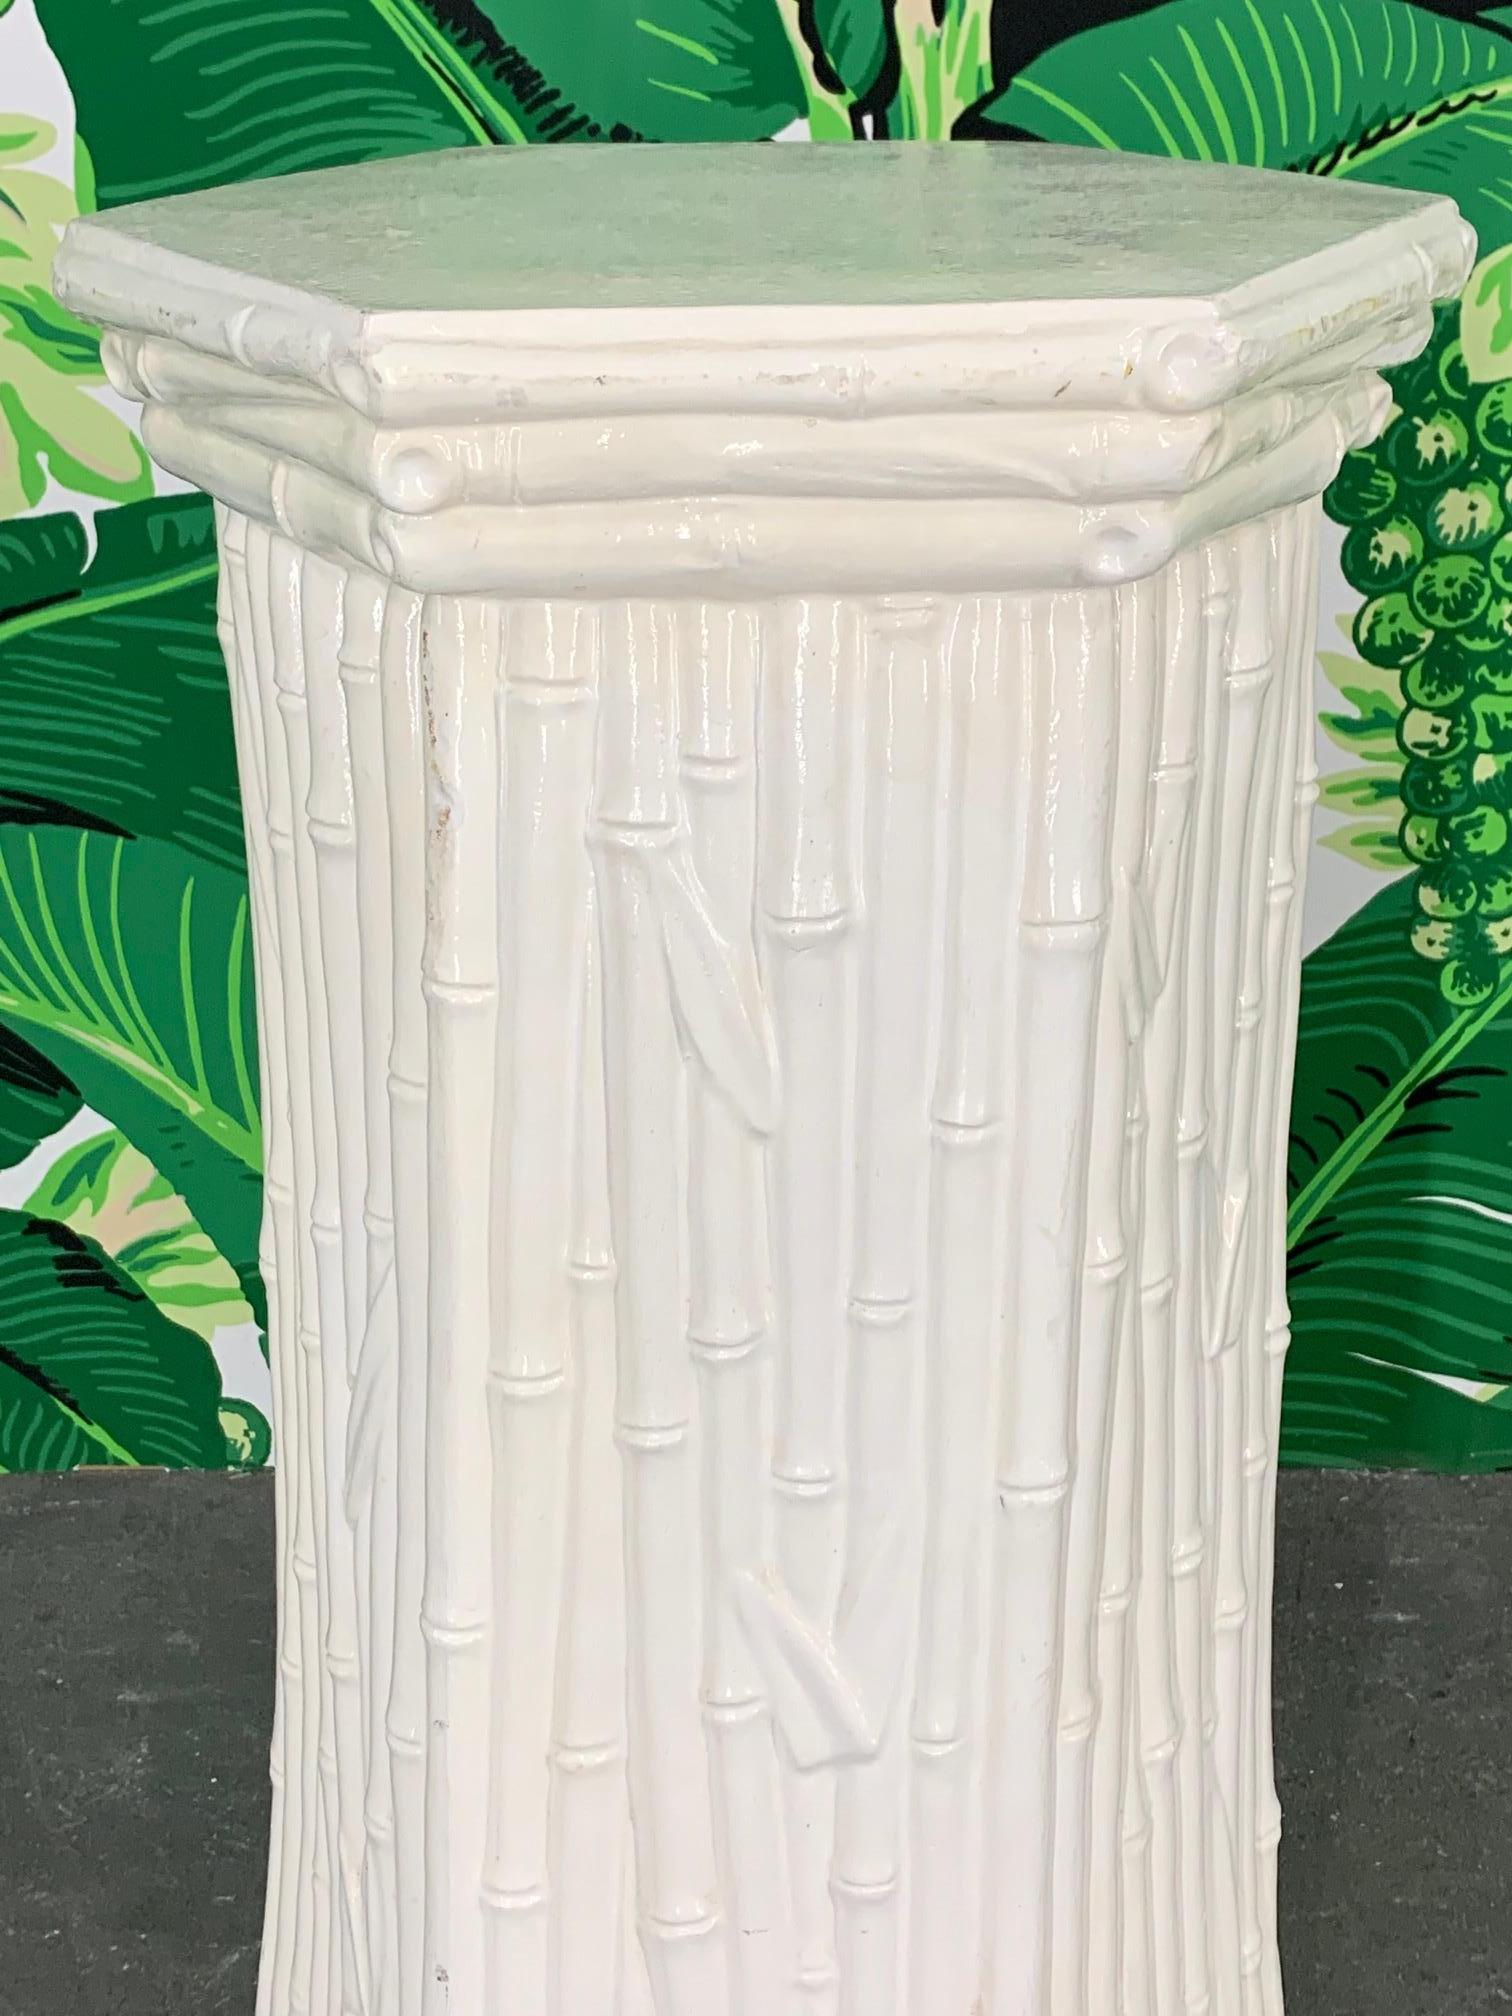 Ceramic pedestal features faux bamboo motif and glossy glazed finish. Very good vintage condition with only very minor imperfections.